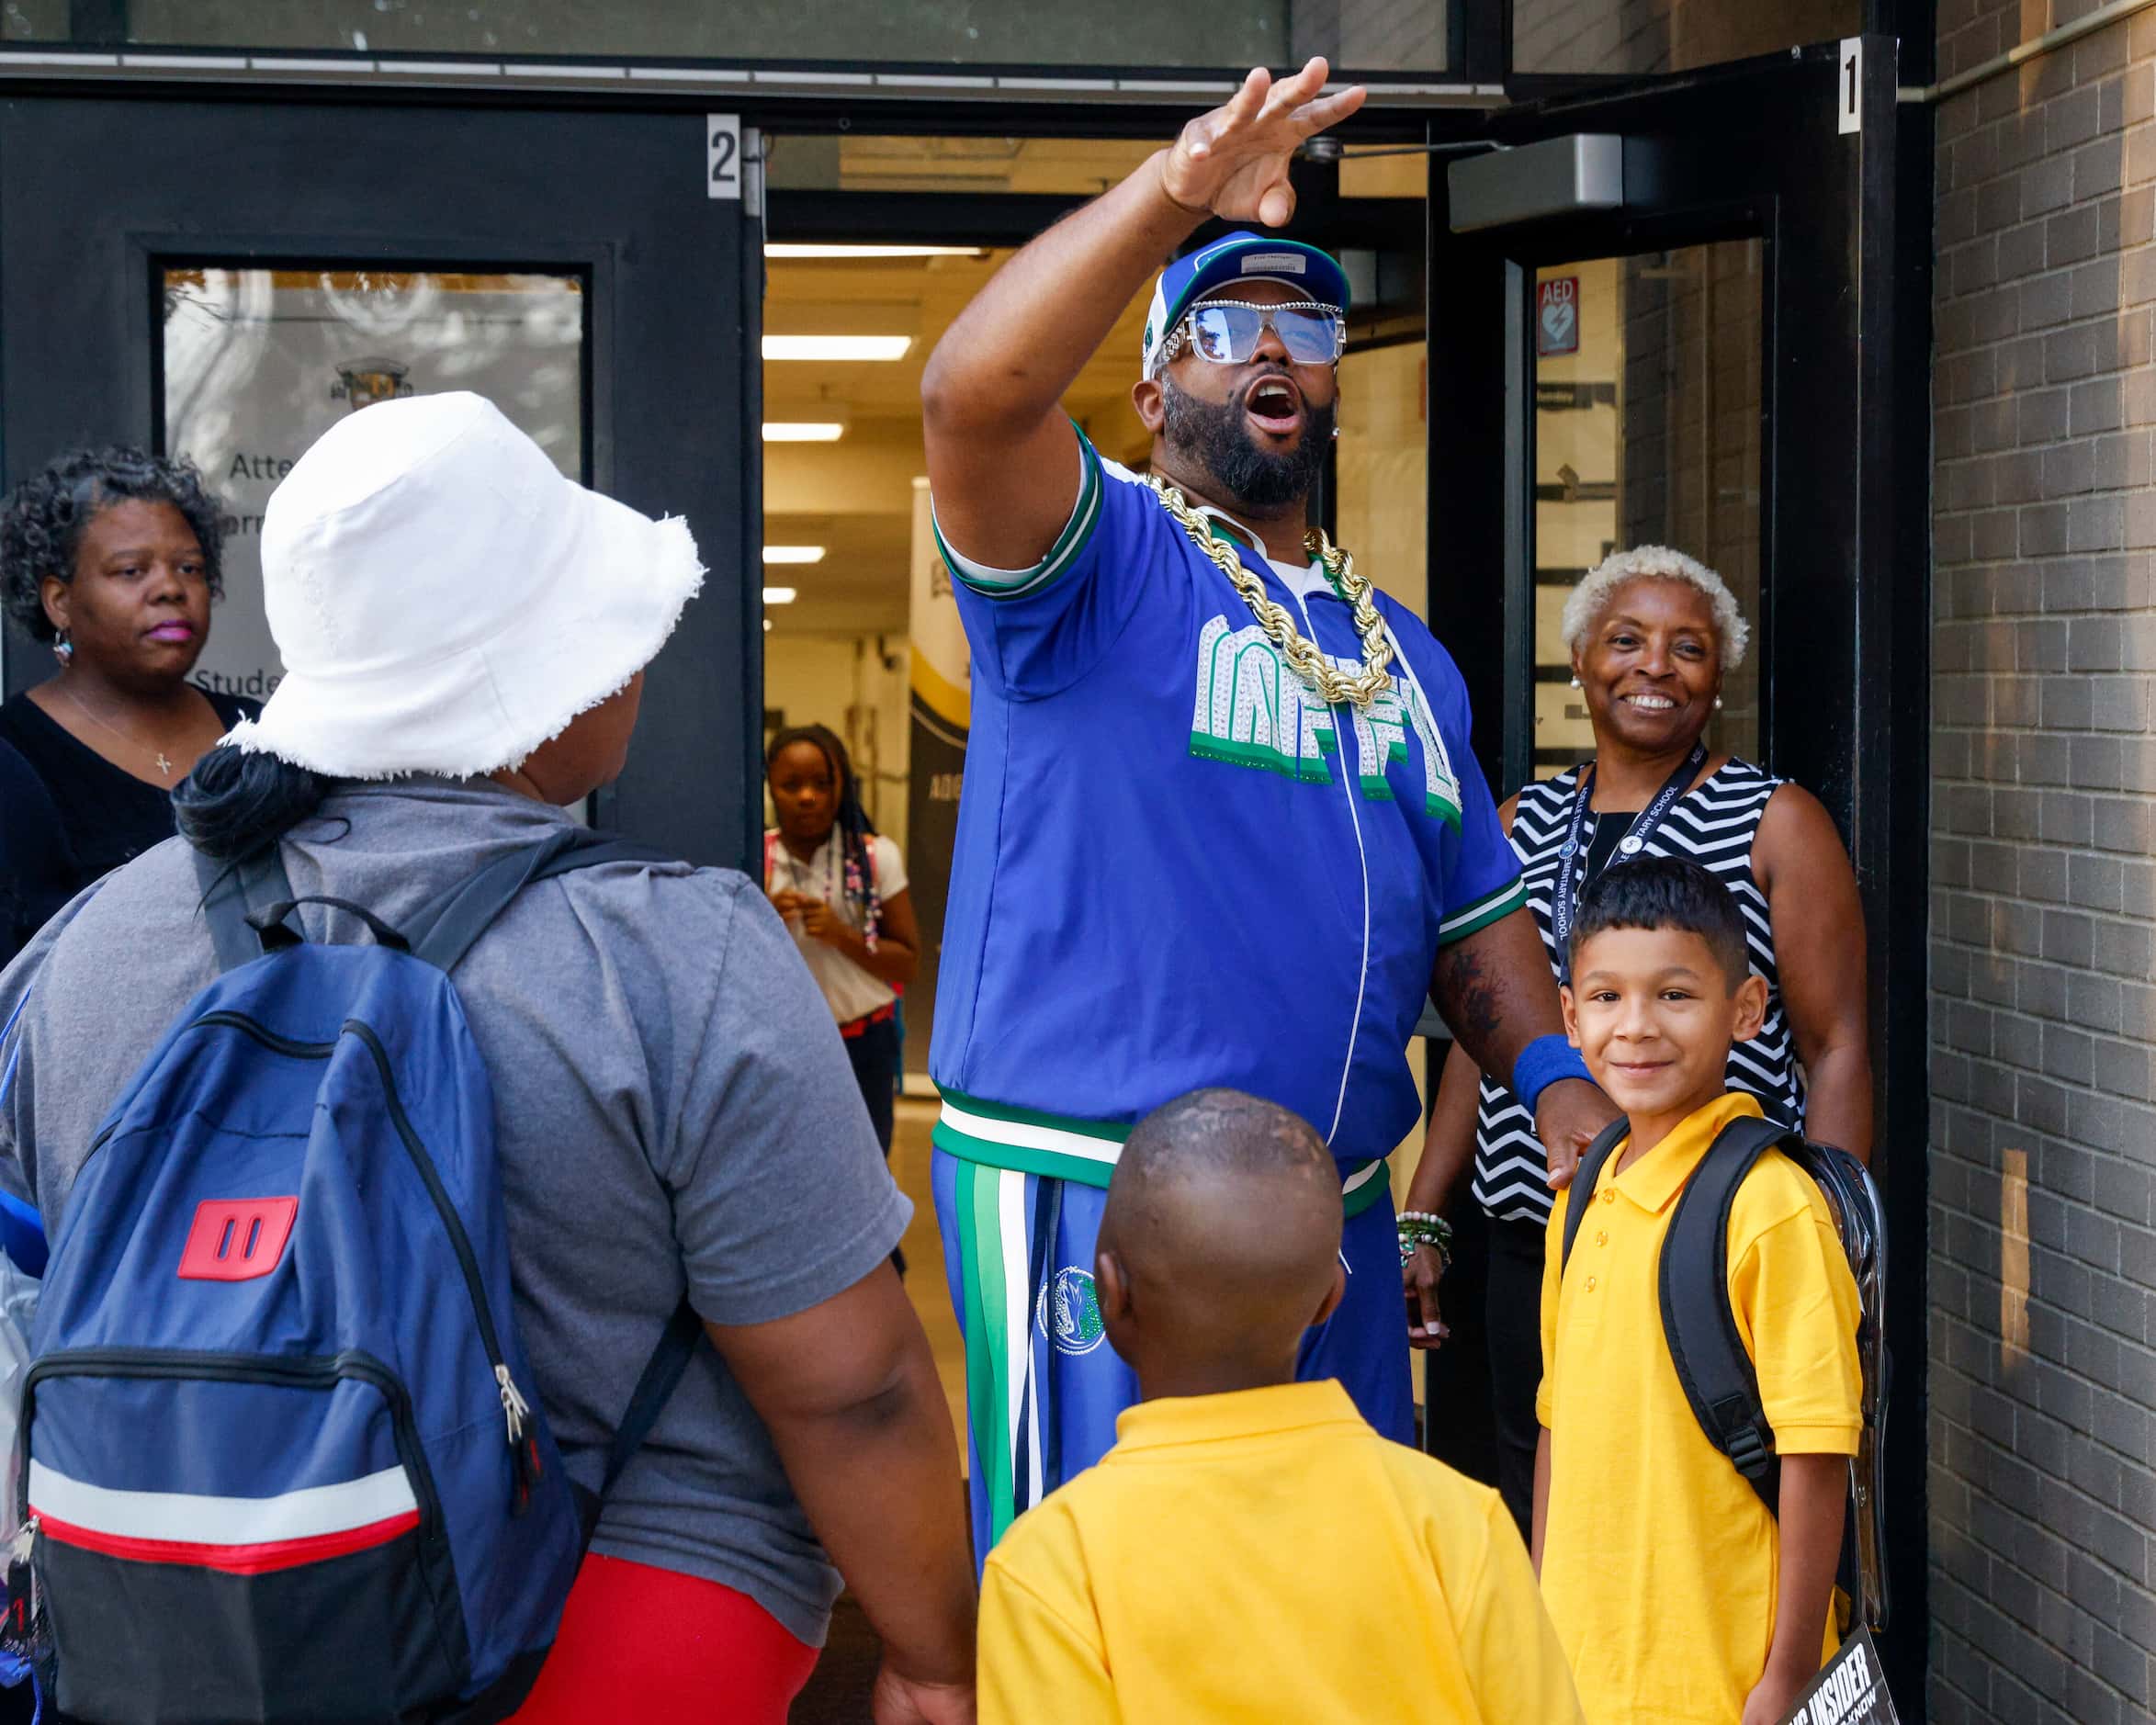 Mavs ManiAAC's Christopher “One Love” McJimson counts down to when students can enter the...